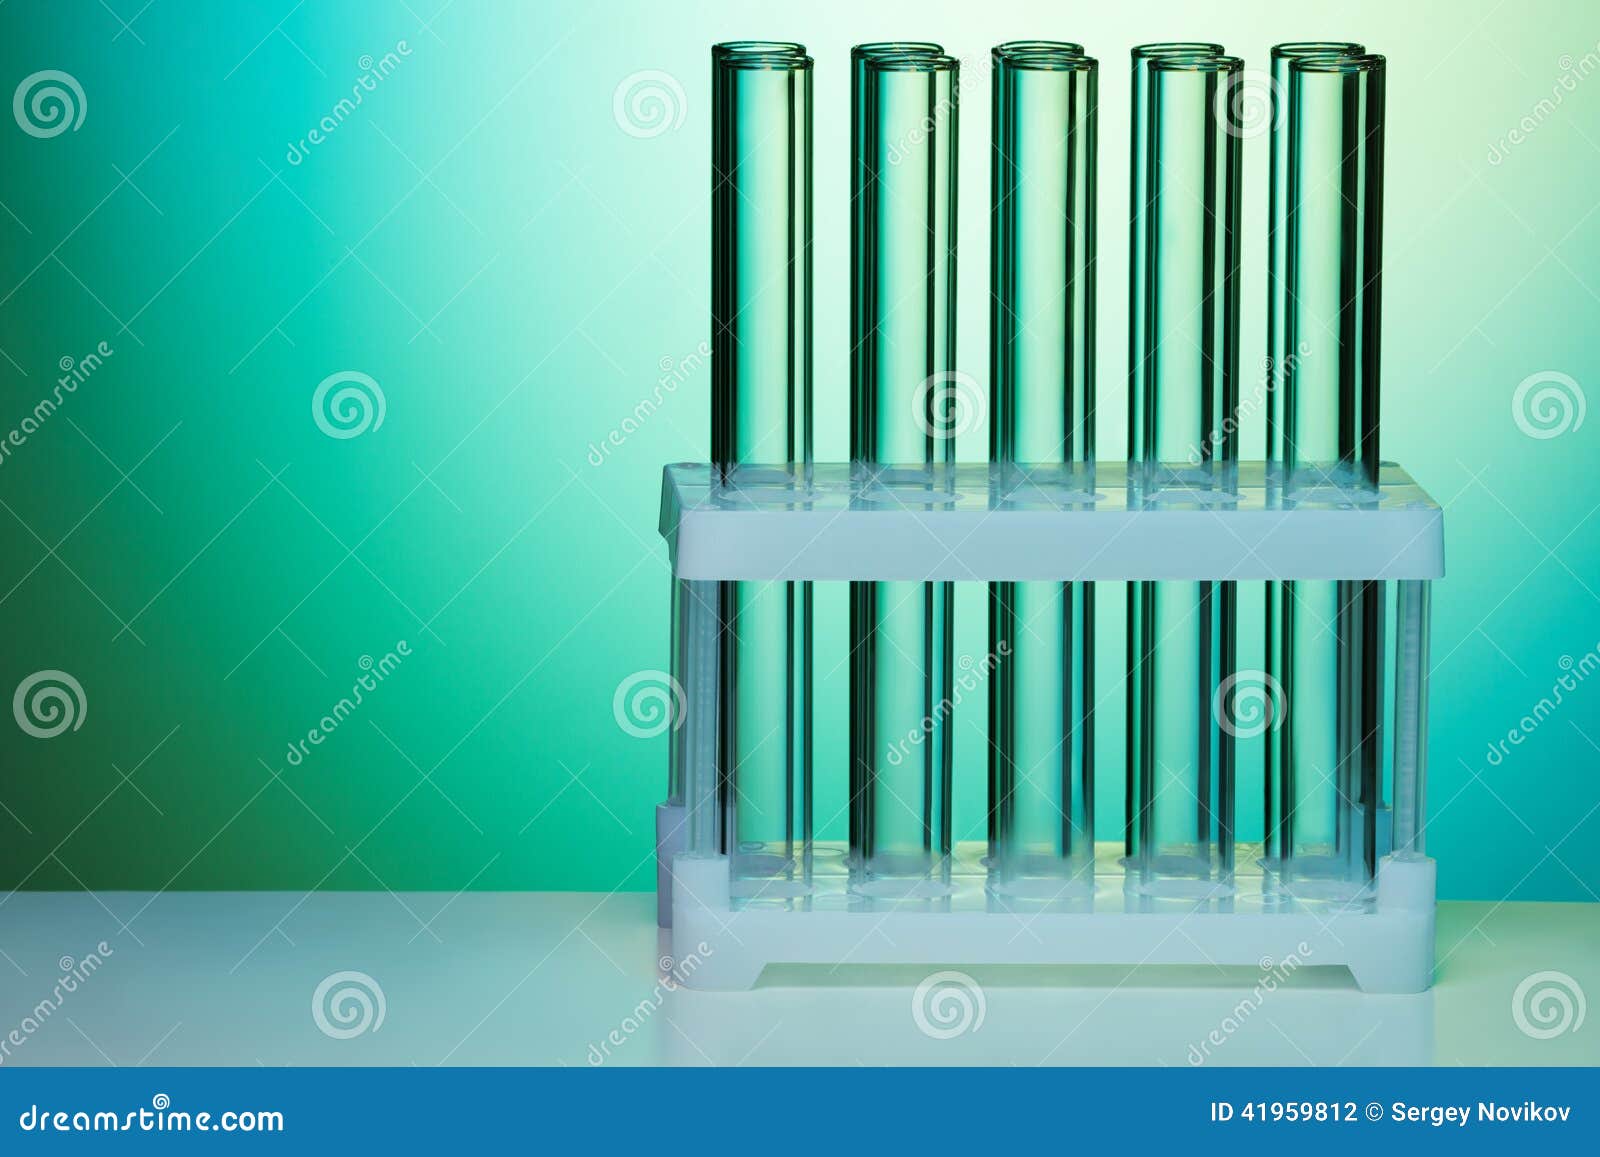 Empty Test Tubes Organized and Fixed in Rows Stock Photo - Image of ...